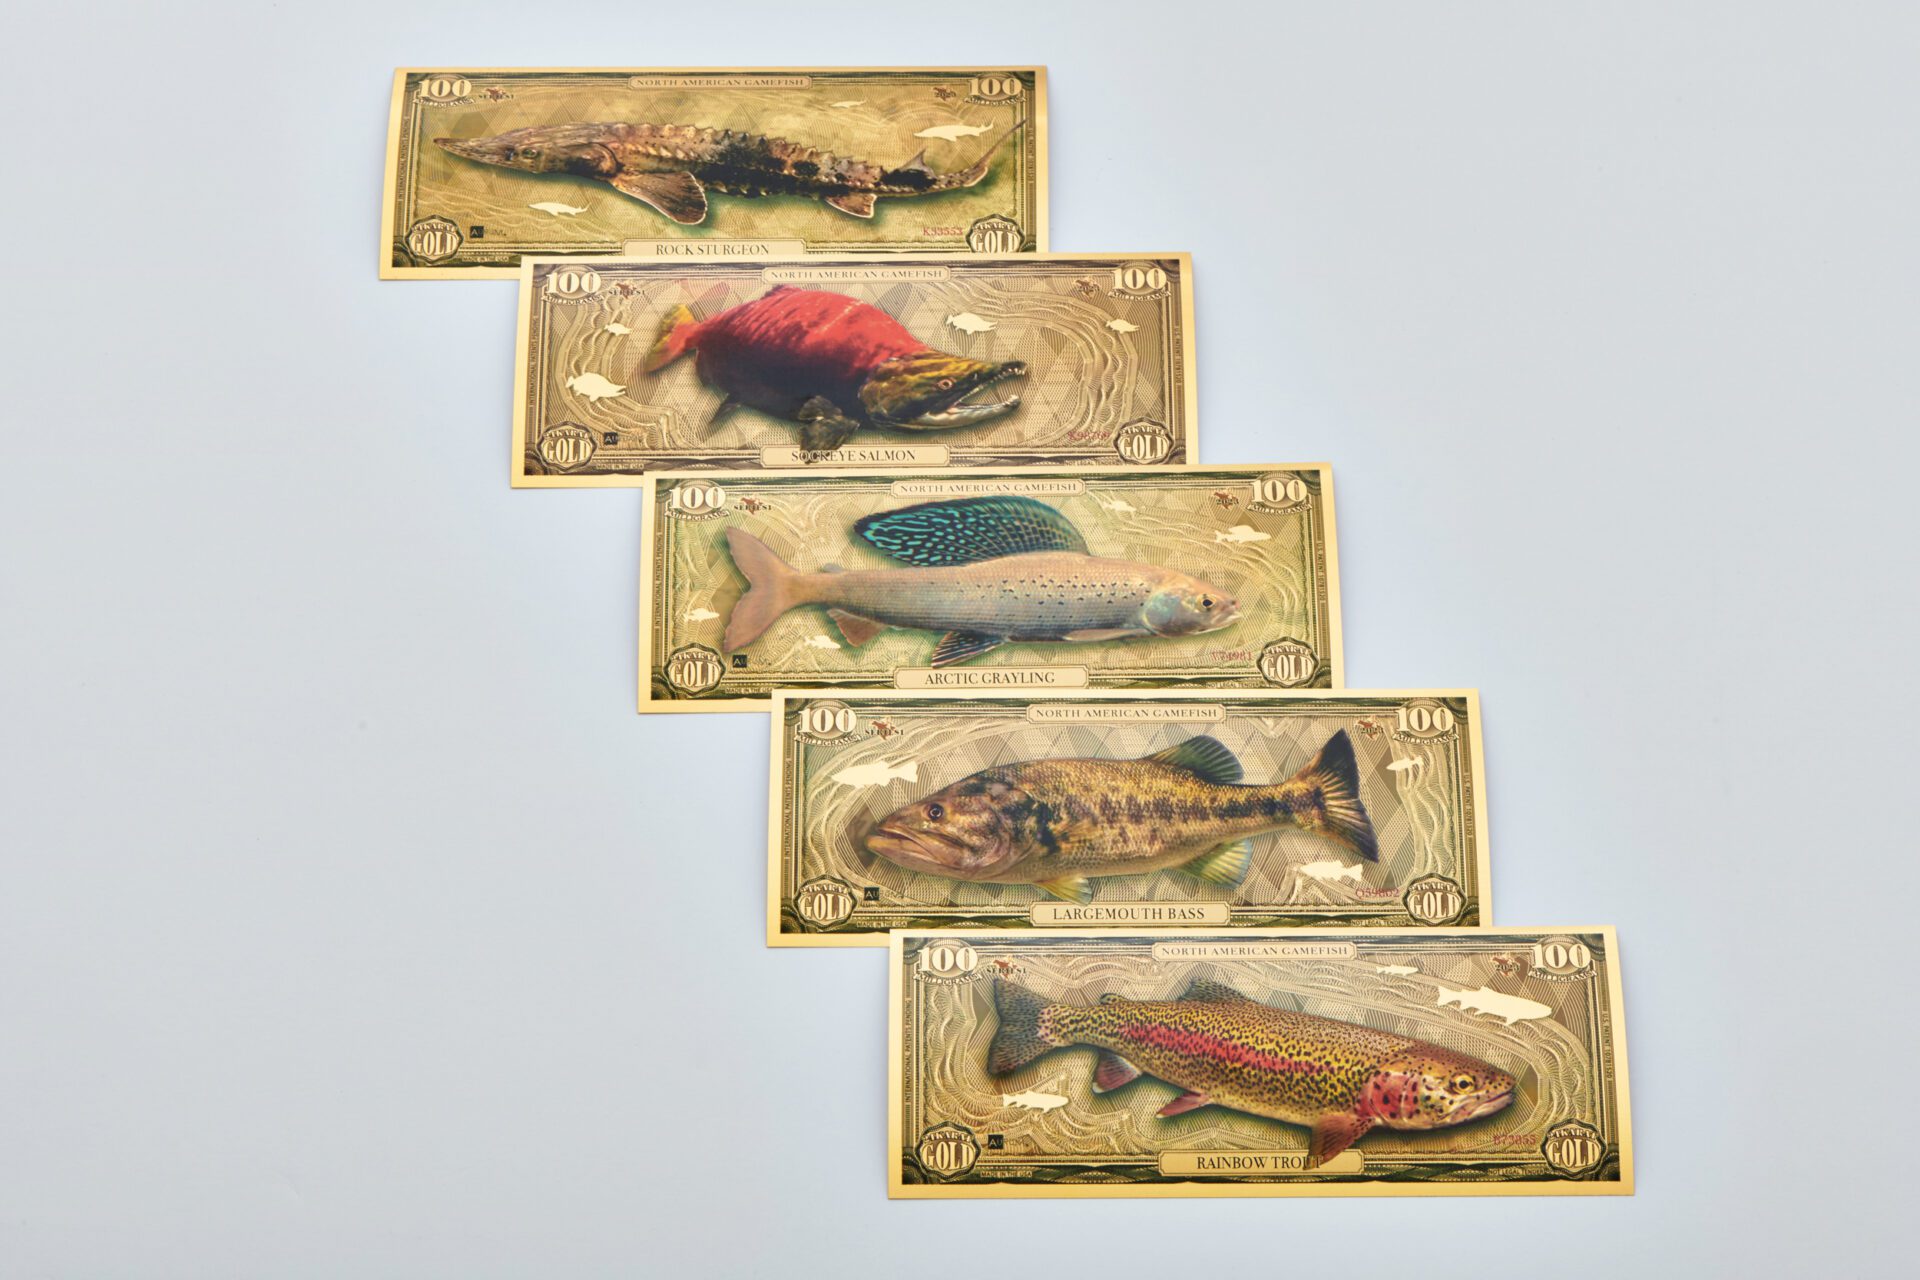 The five bills included in the North American Game Fish Set. Top to Bottom: Rock Sturgeon, Sockeye Salmon, Arctic Grayling, Largemouth Bass, and Rainbow Trout